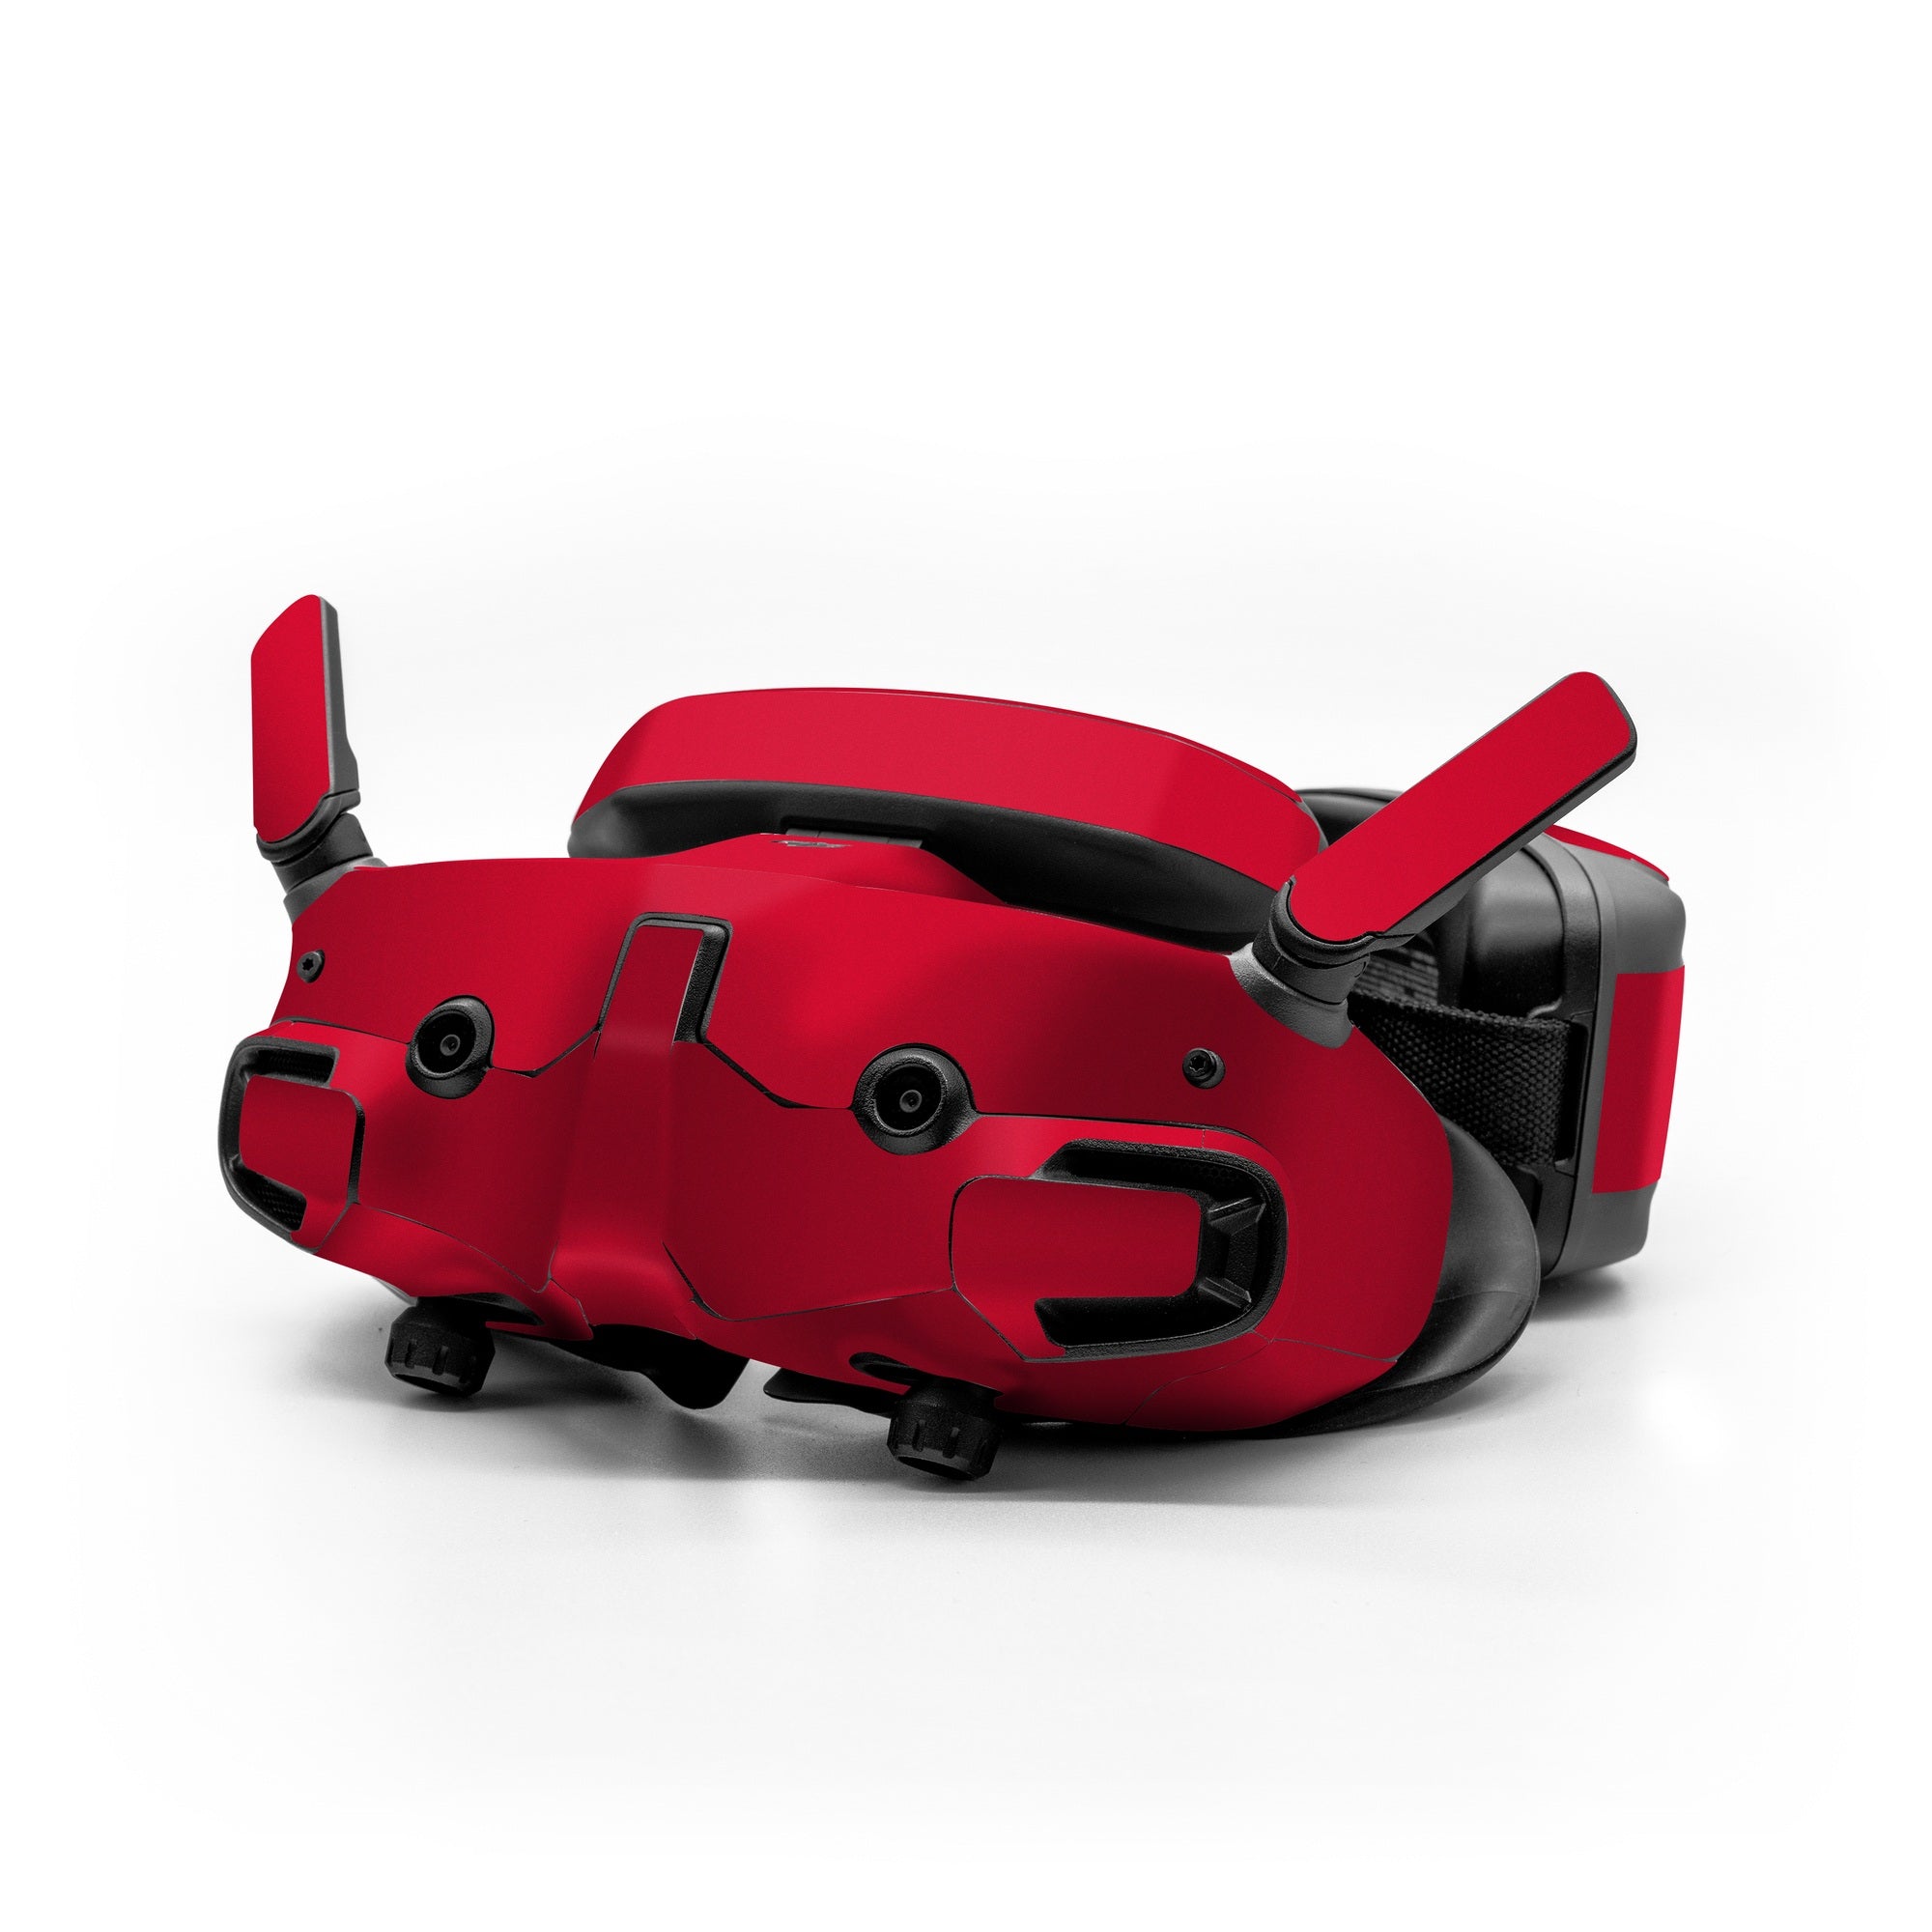 Solid State Red - DJI Goggles 3 Skin